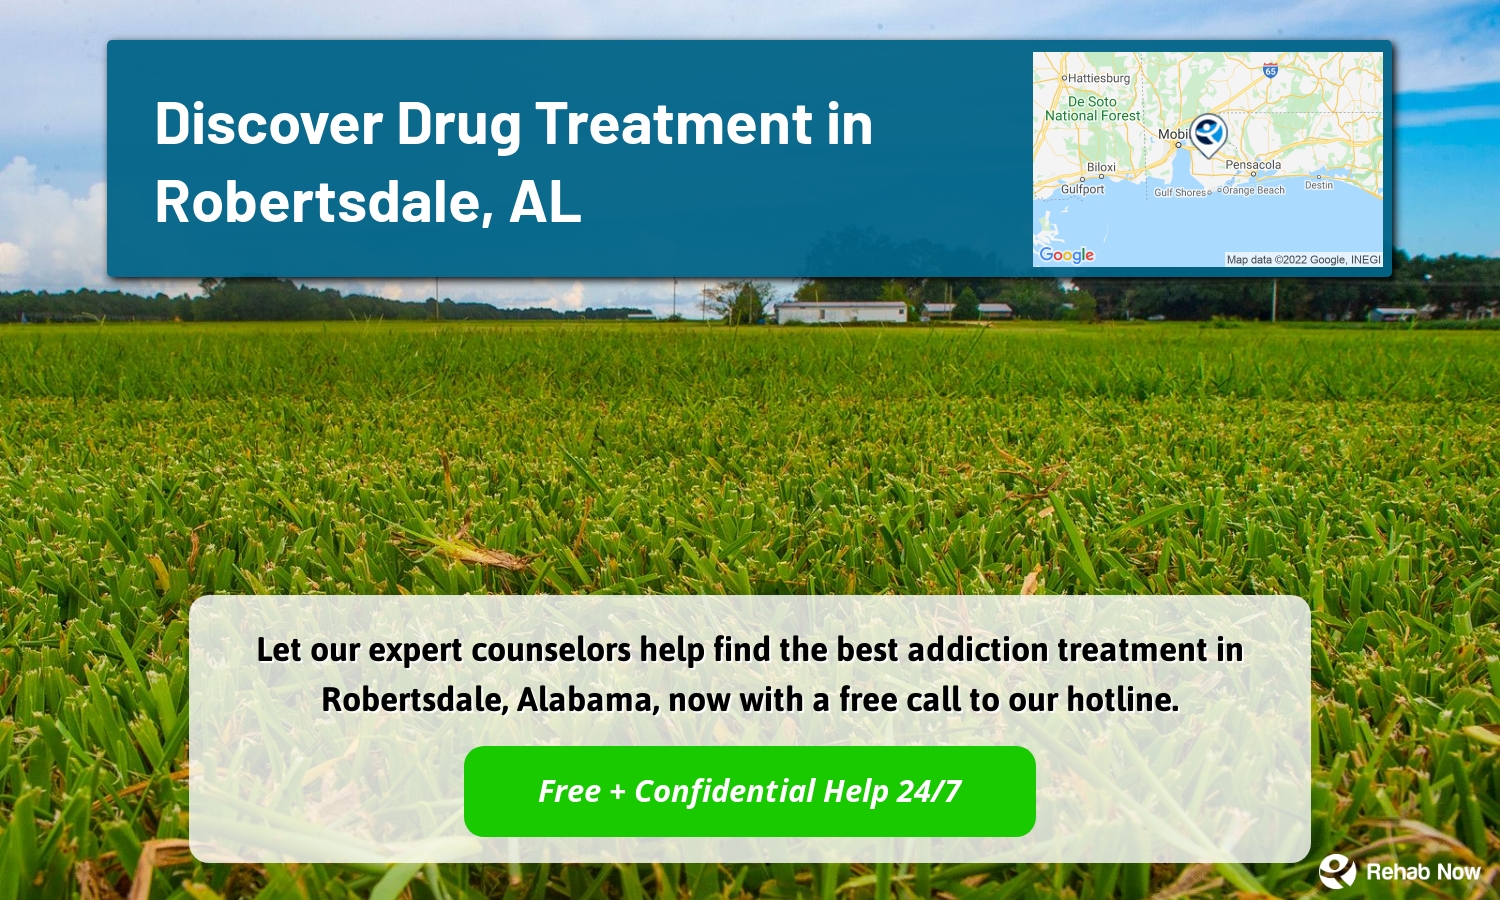 Let our expert counselors help find the best addiction treatment in Robertsdale, Alabama, now with a free call to our hotline.